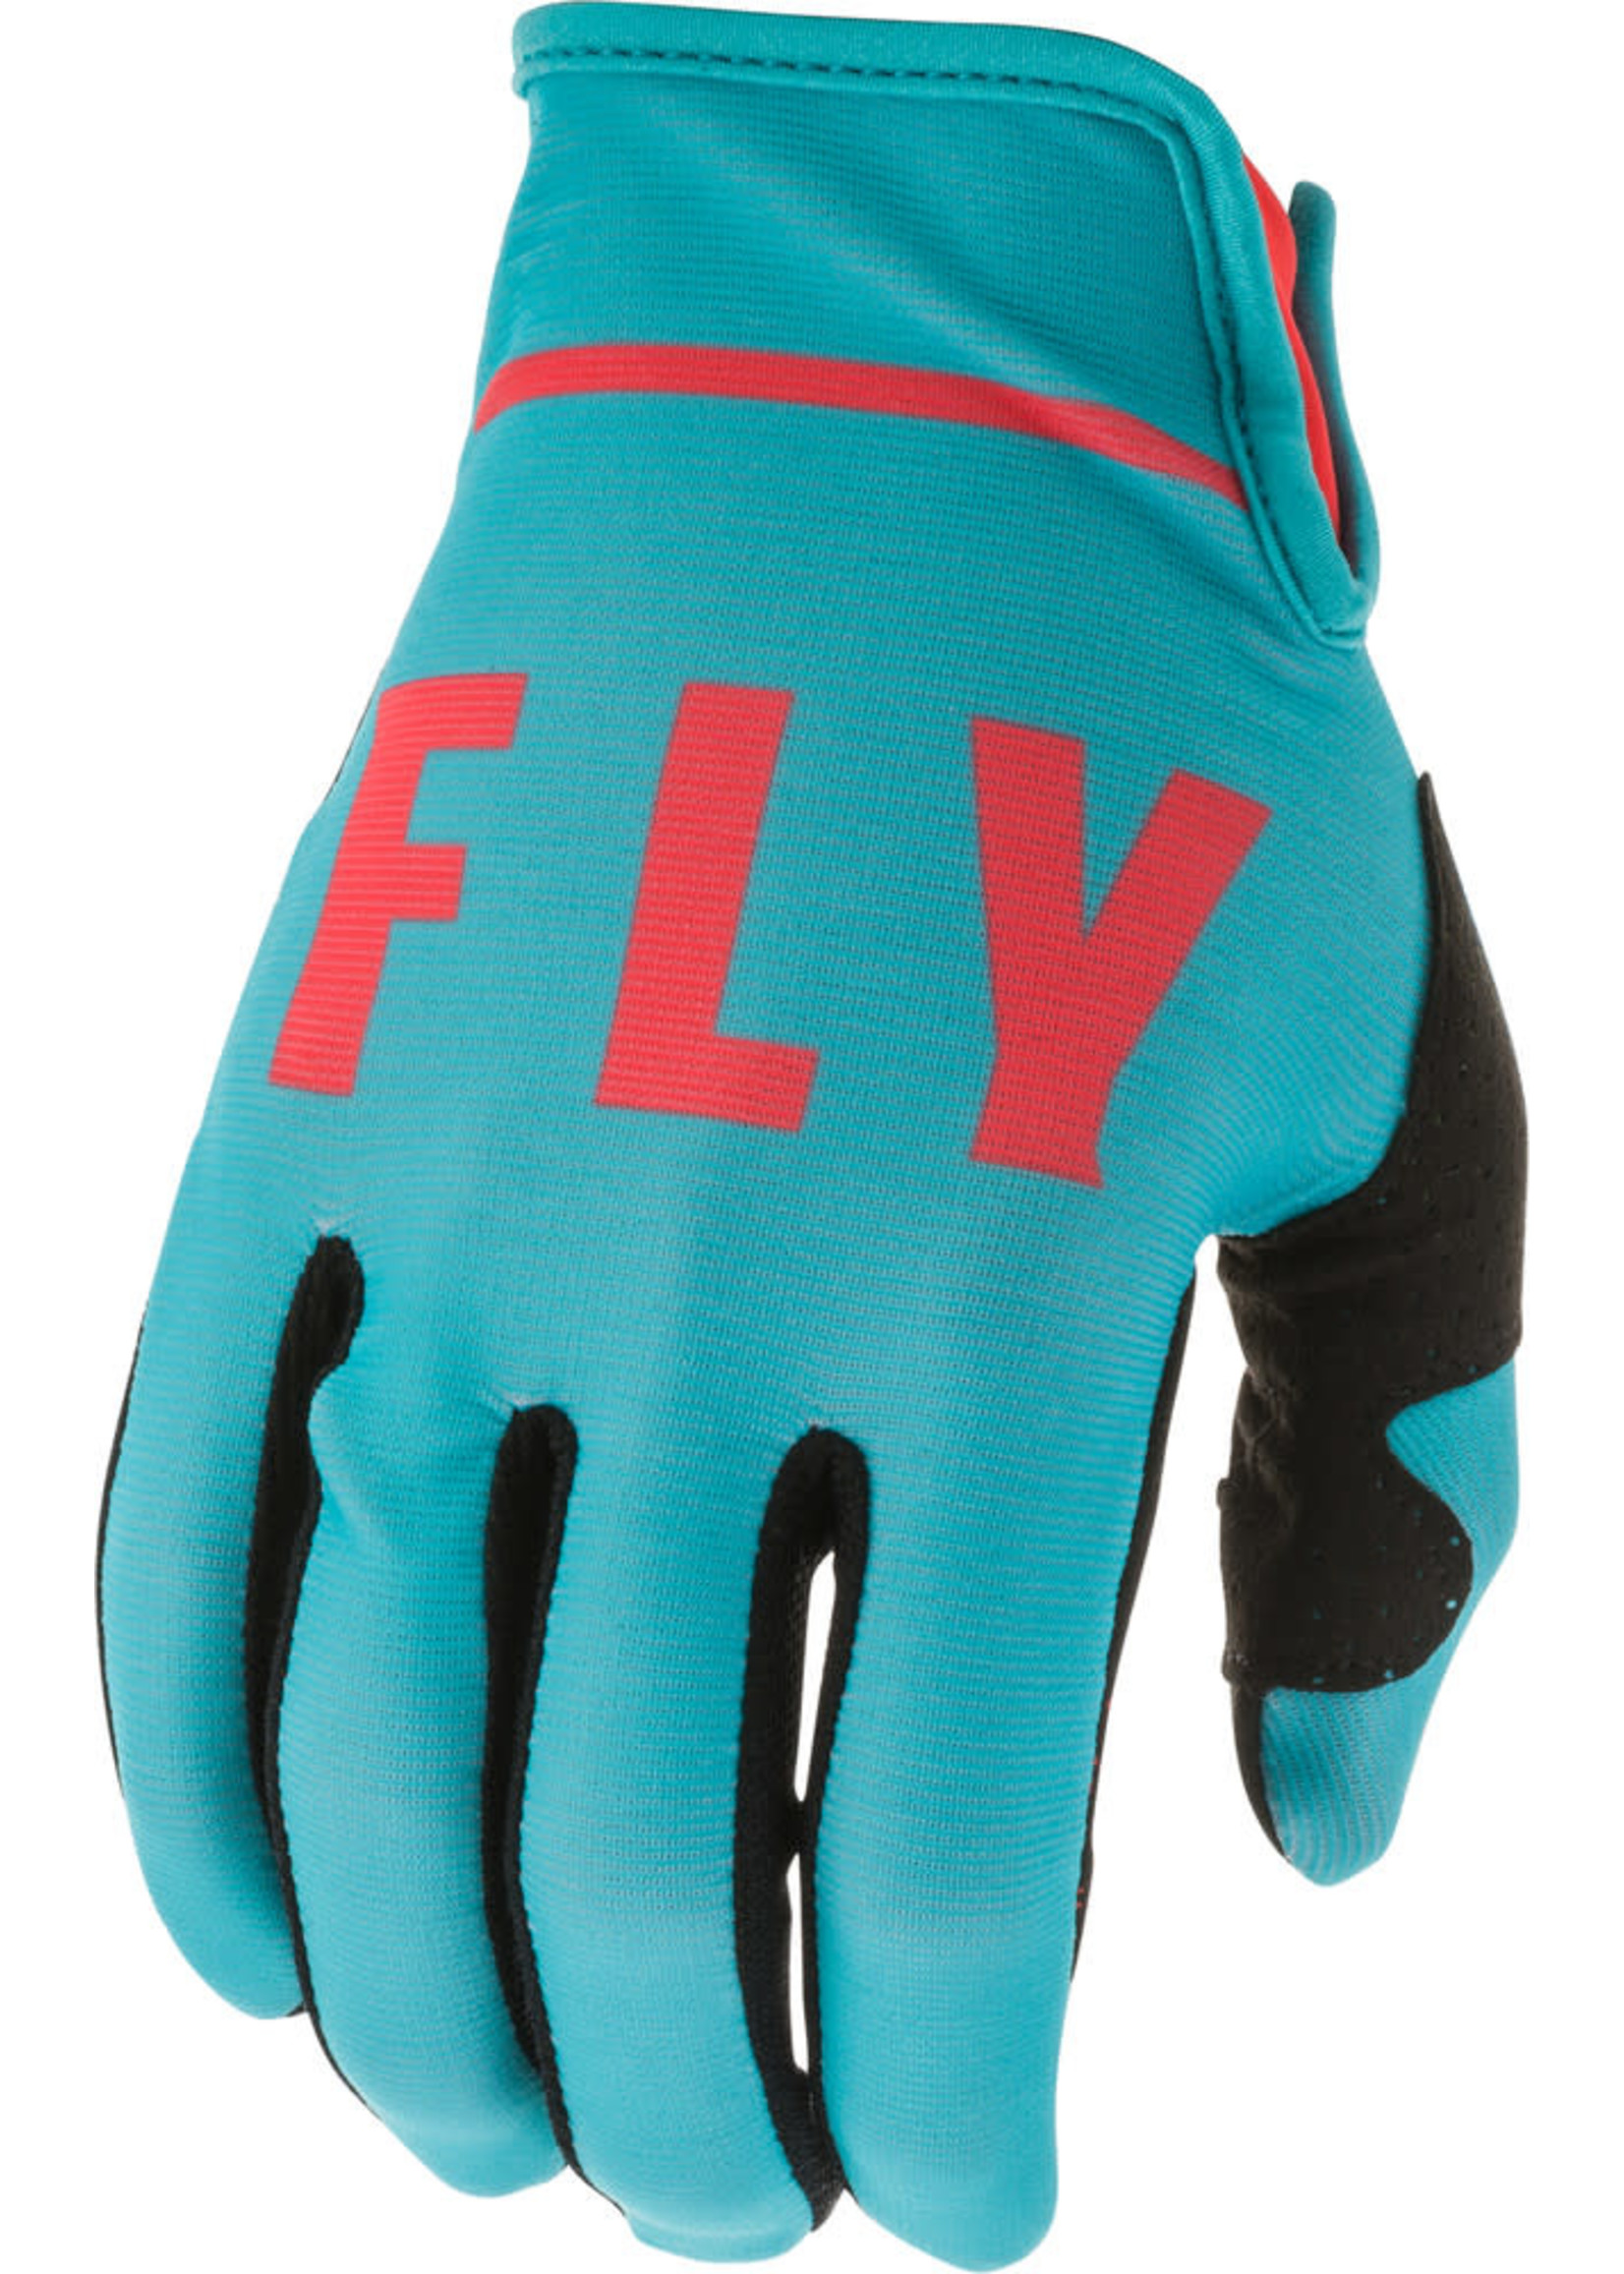 FLY RACING FLY LITE GLV BLUE/CORAL SZ 11